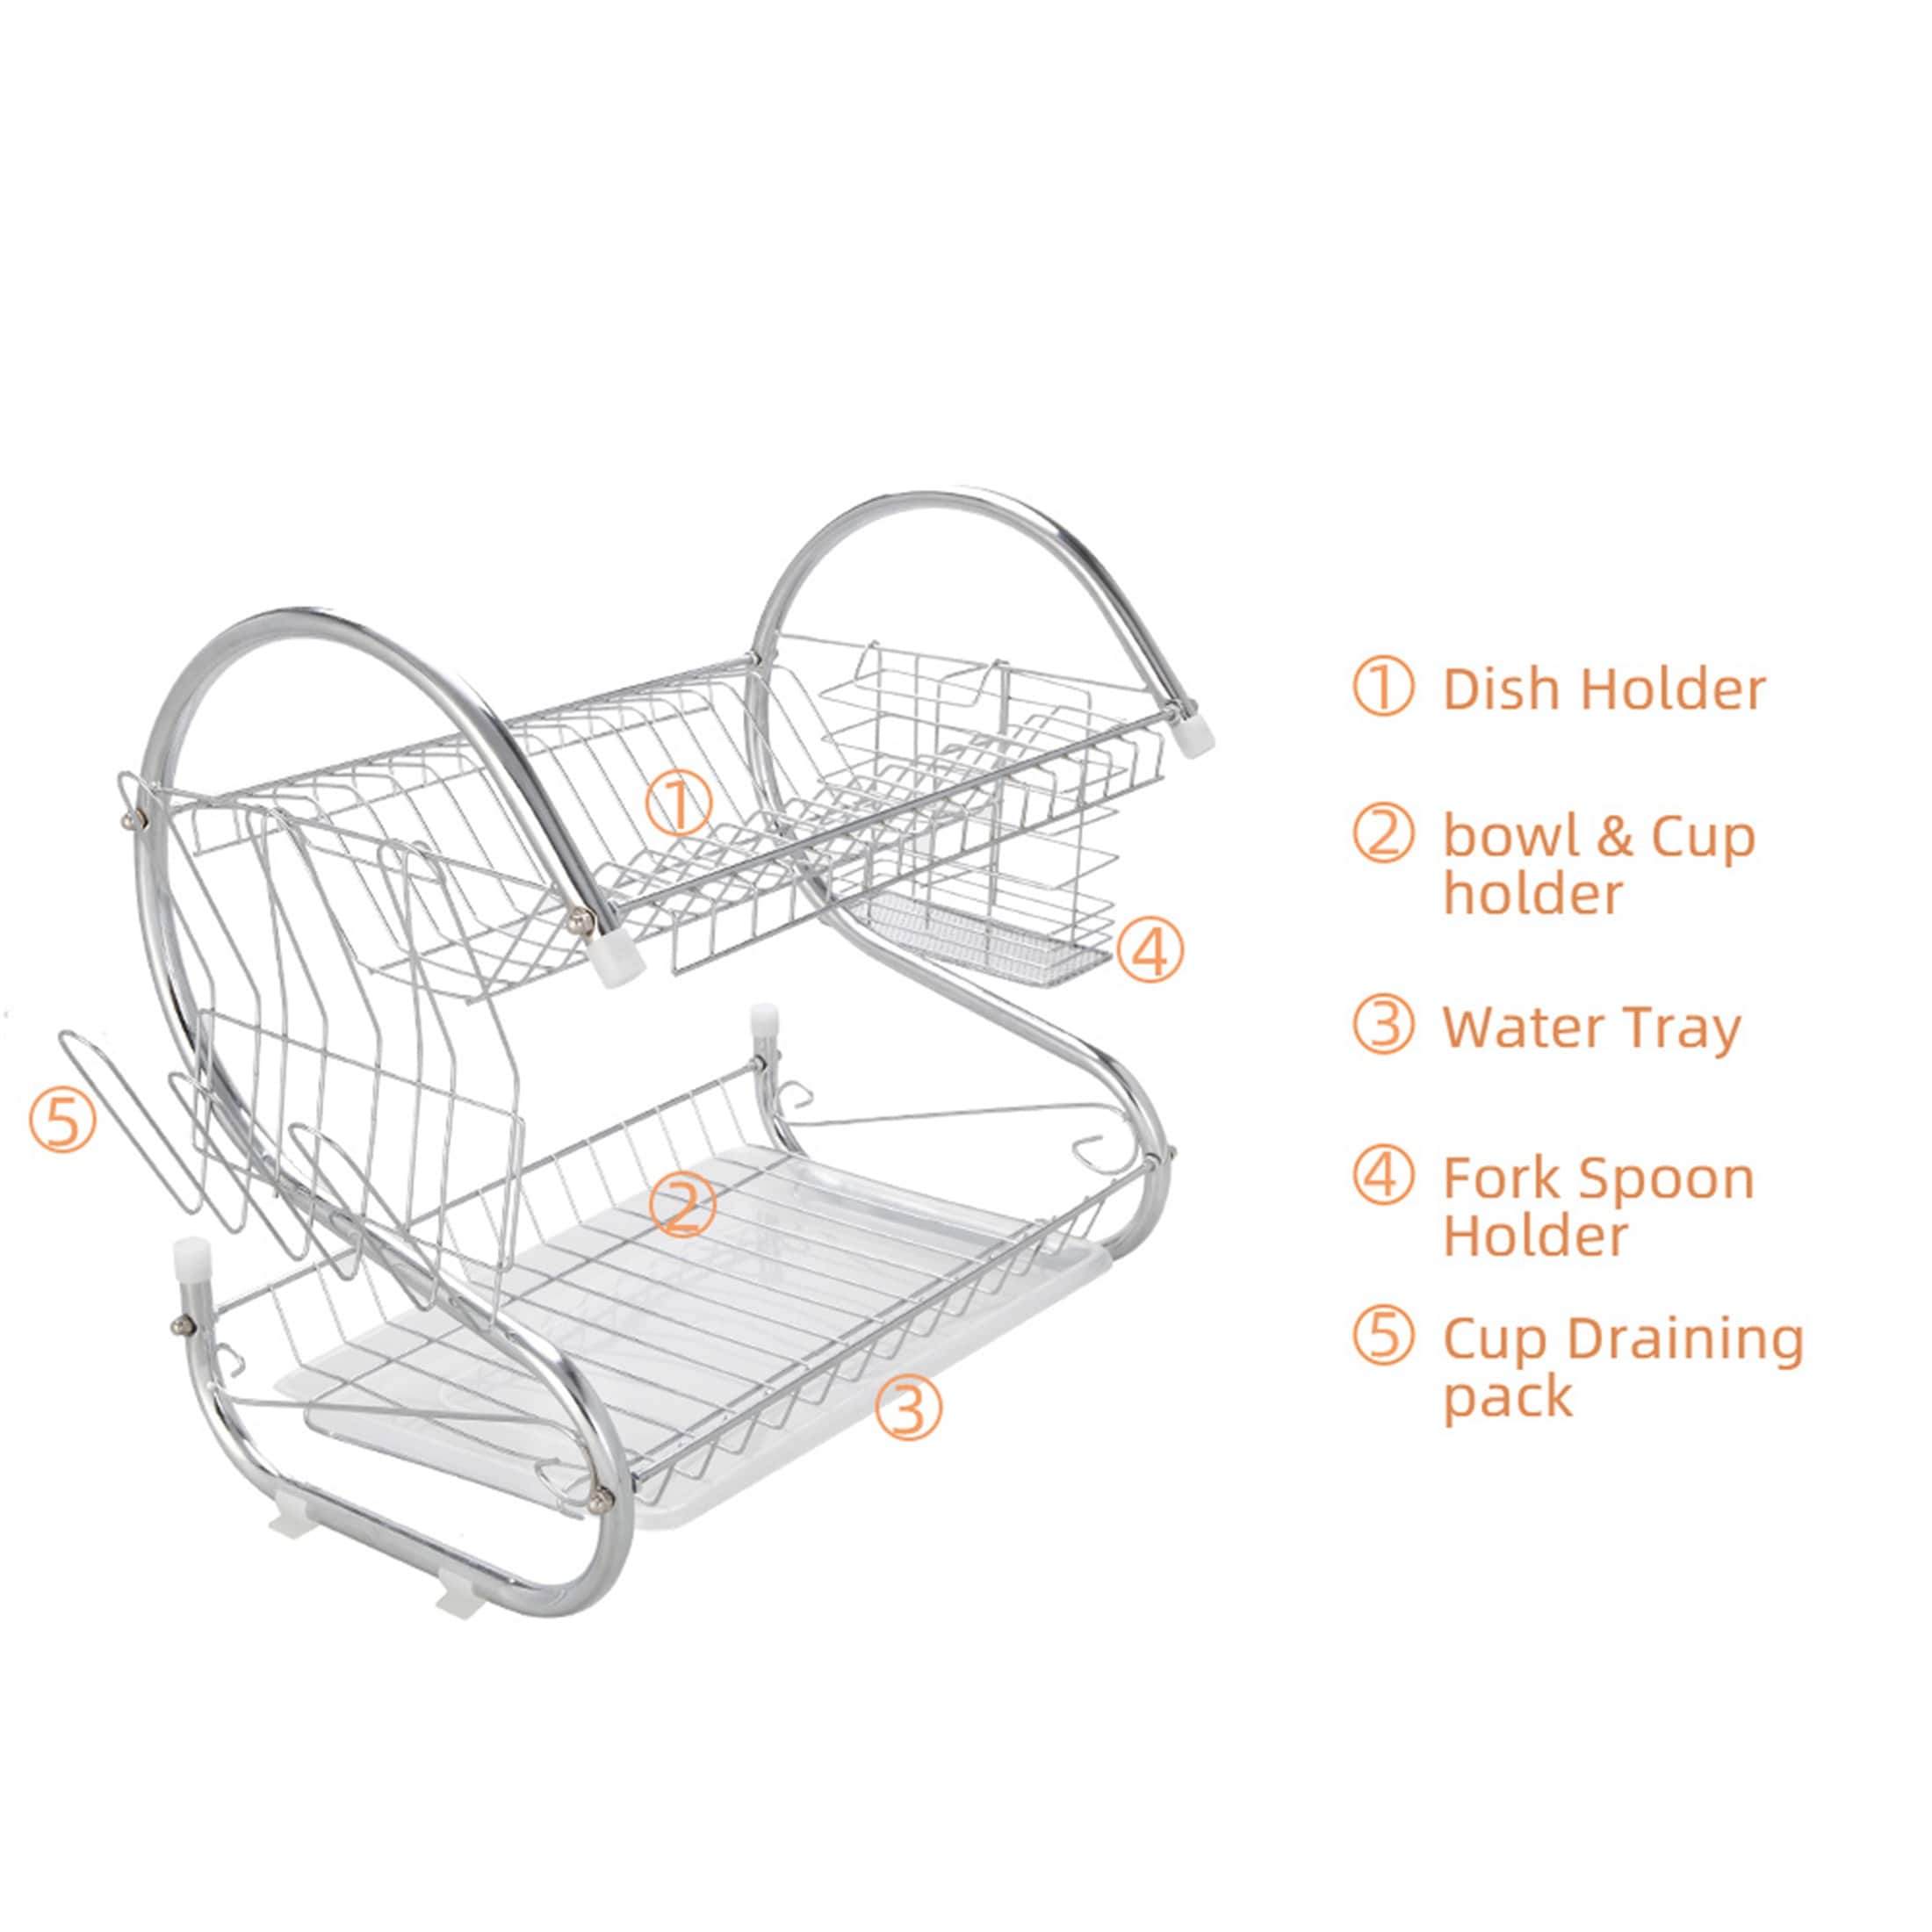 https://ak1.ostkcdn.com/images/products/is/images/direct/5ab4f8d3716a5376f0b9060a10f2377b948fa394/2-Tier-Dish-Drying-Rack-Drainer-Stainless-Steel-Kitchen-Cutlery-Holder.jpg